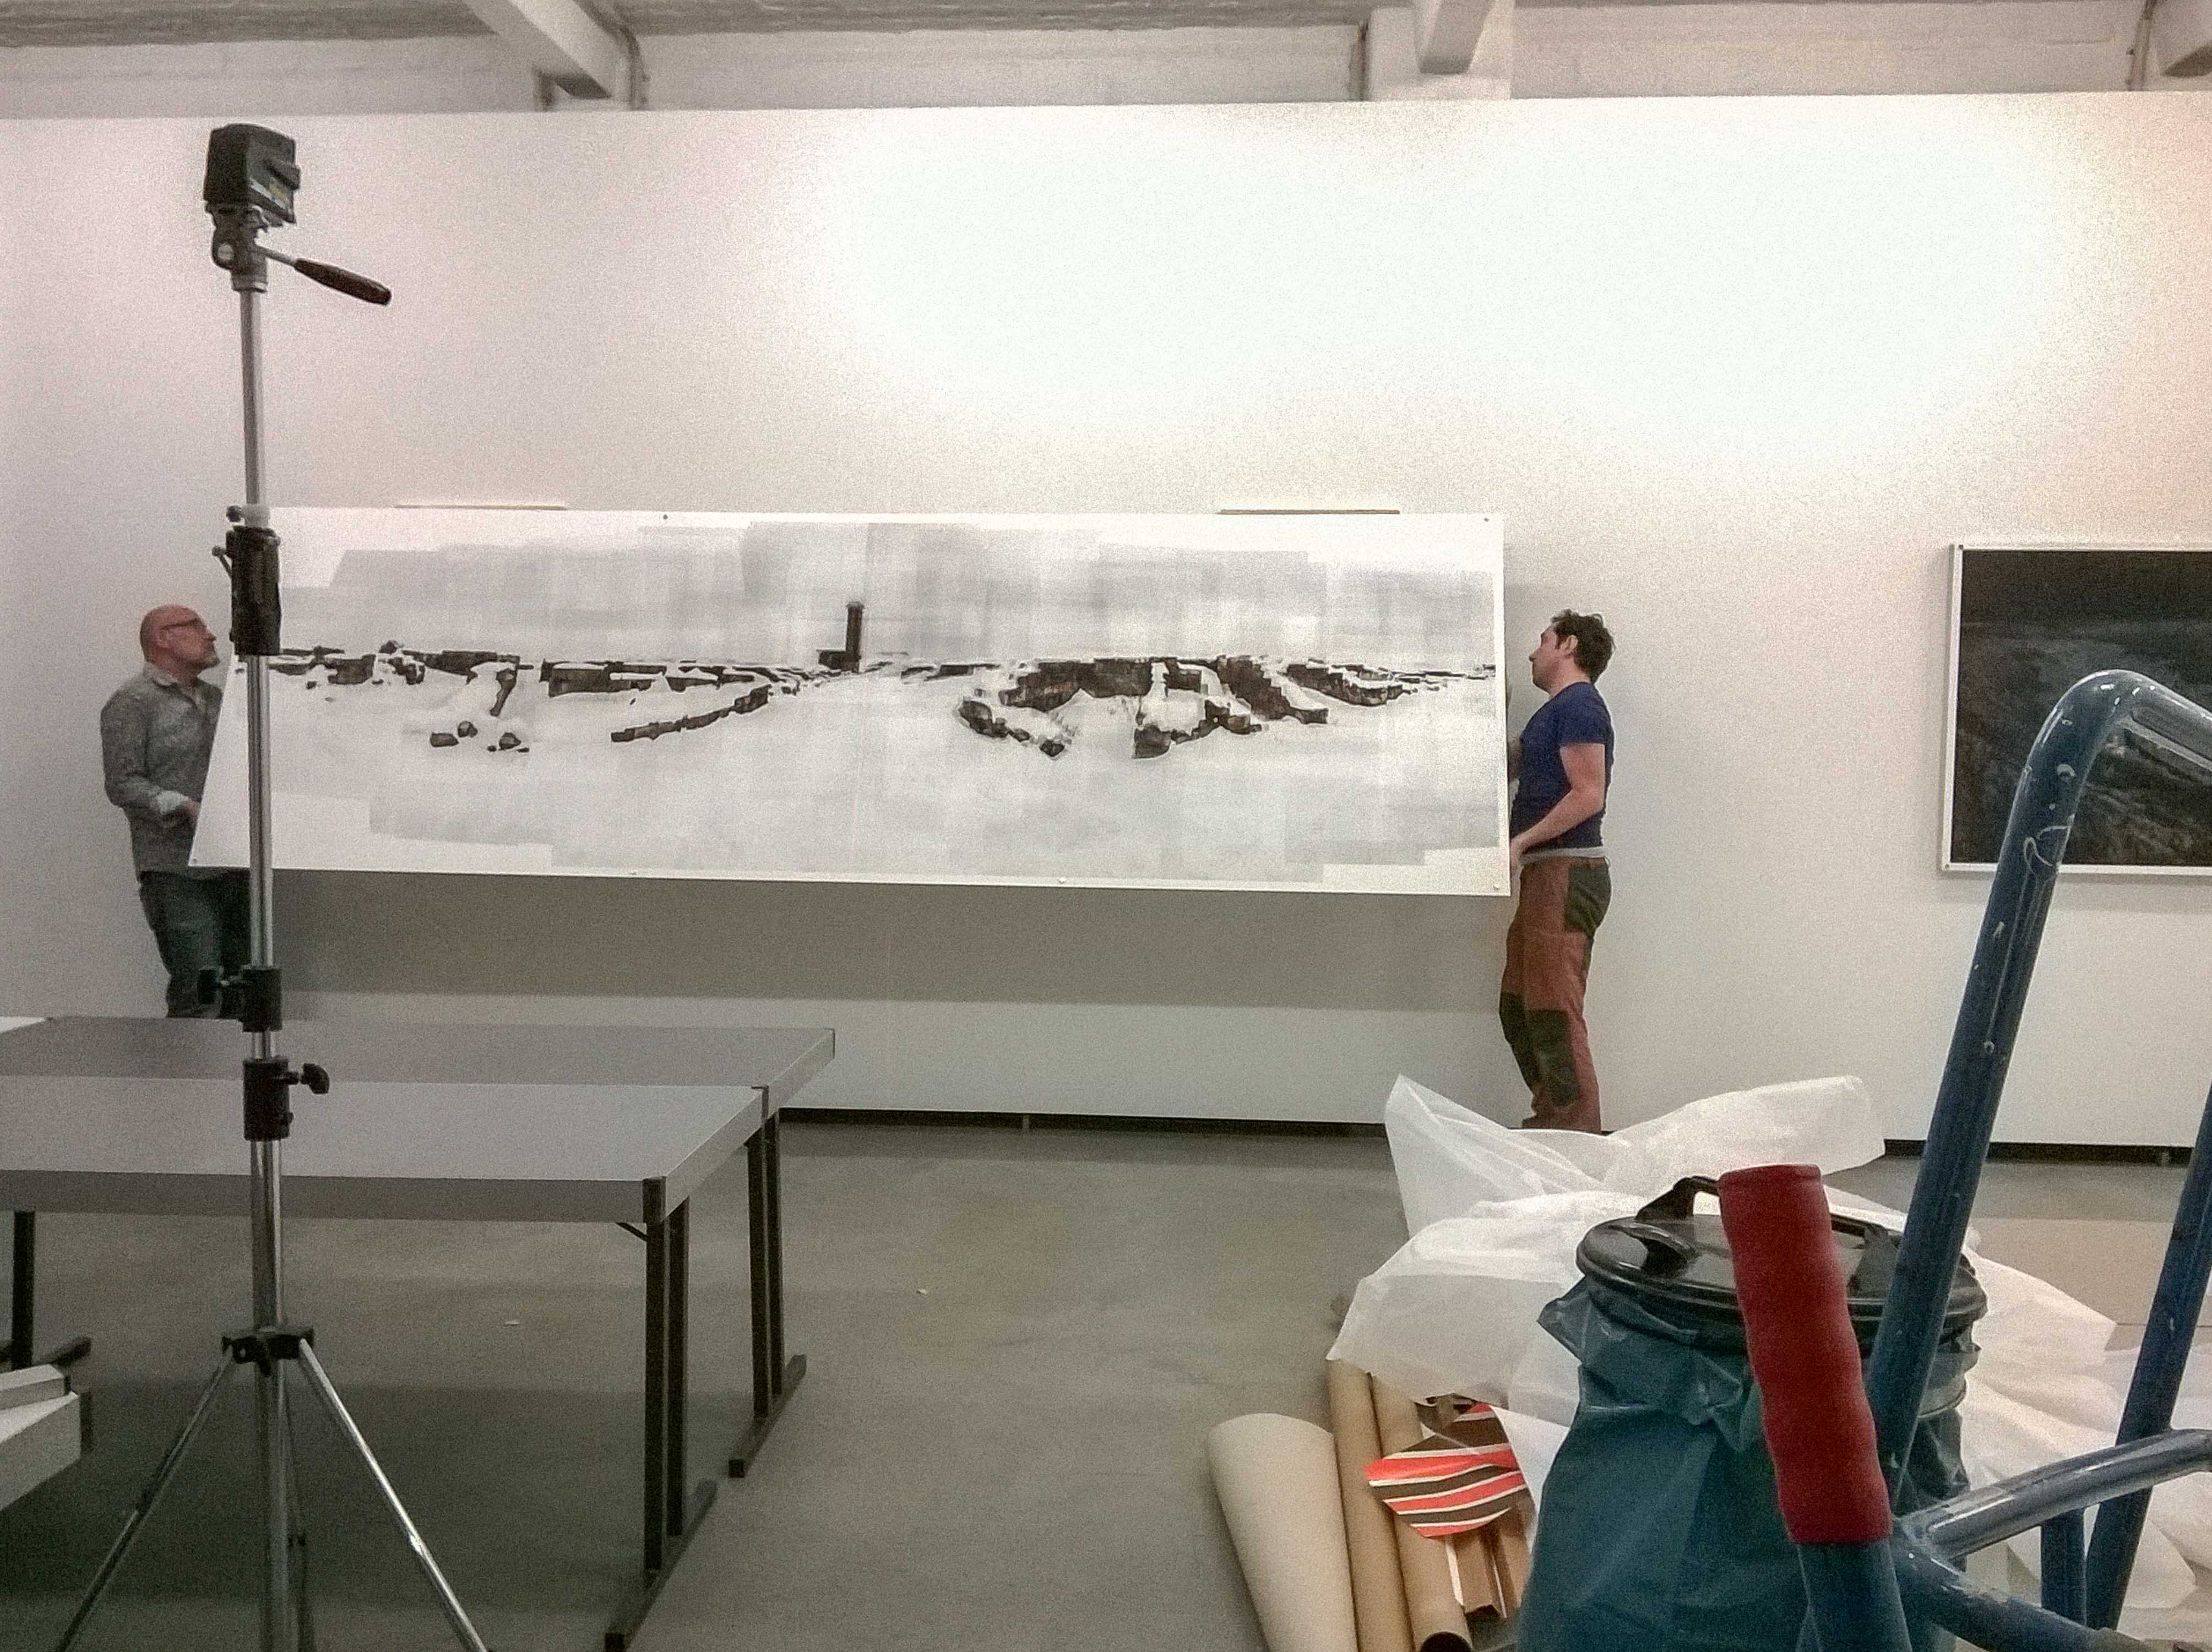 Installing the exhibition 2